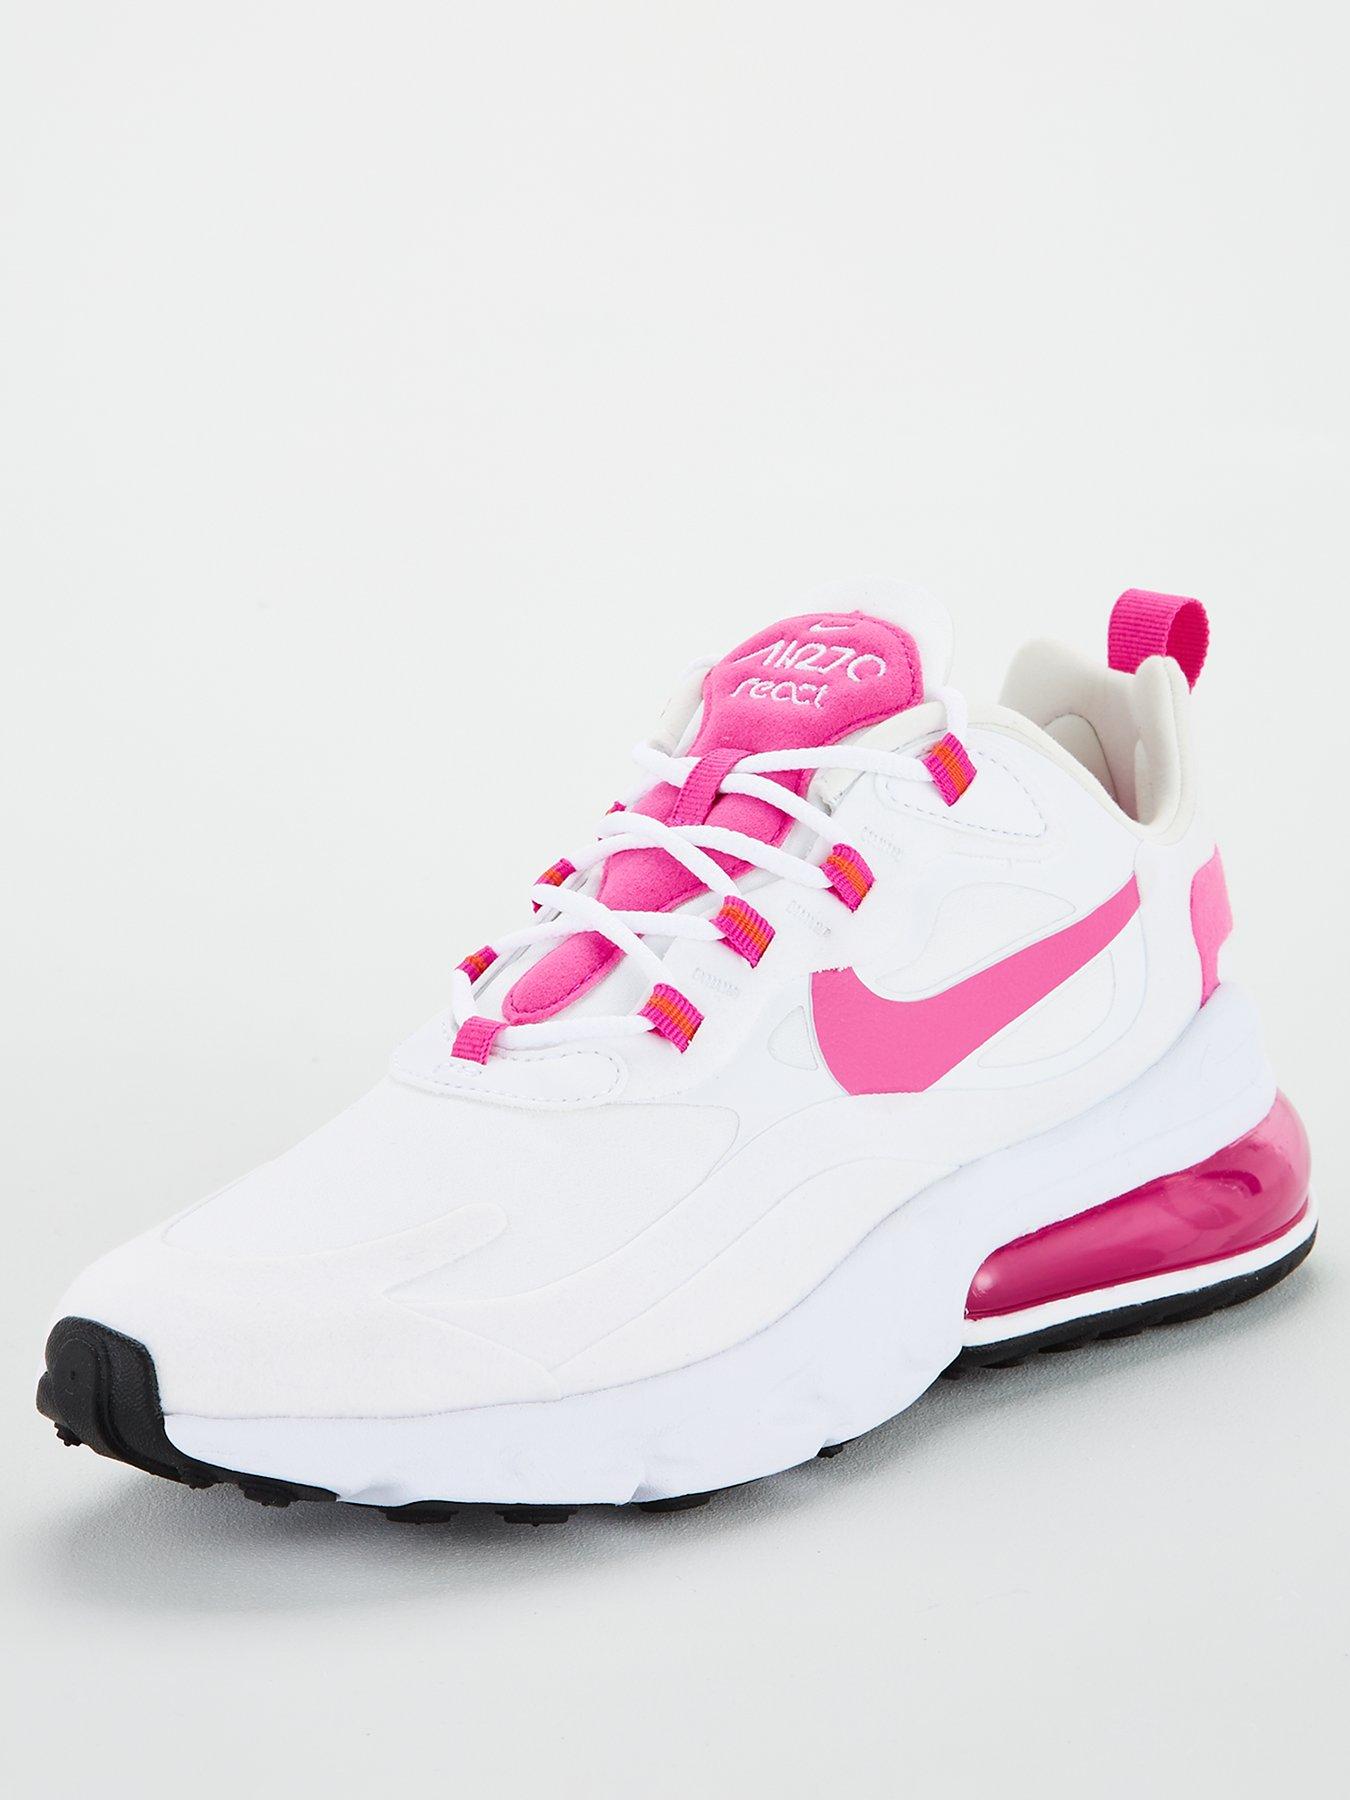 air max 270 react pink and white